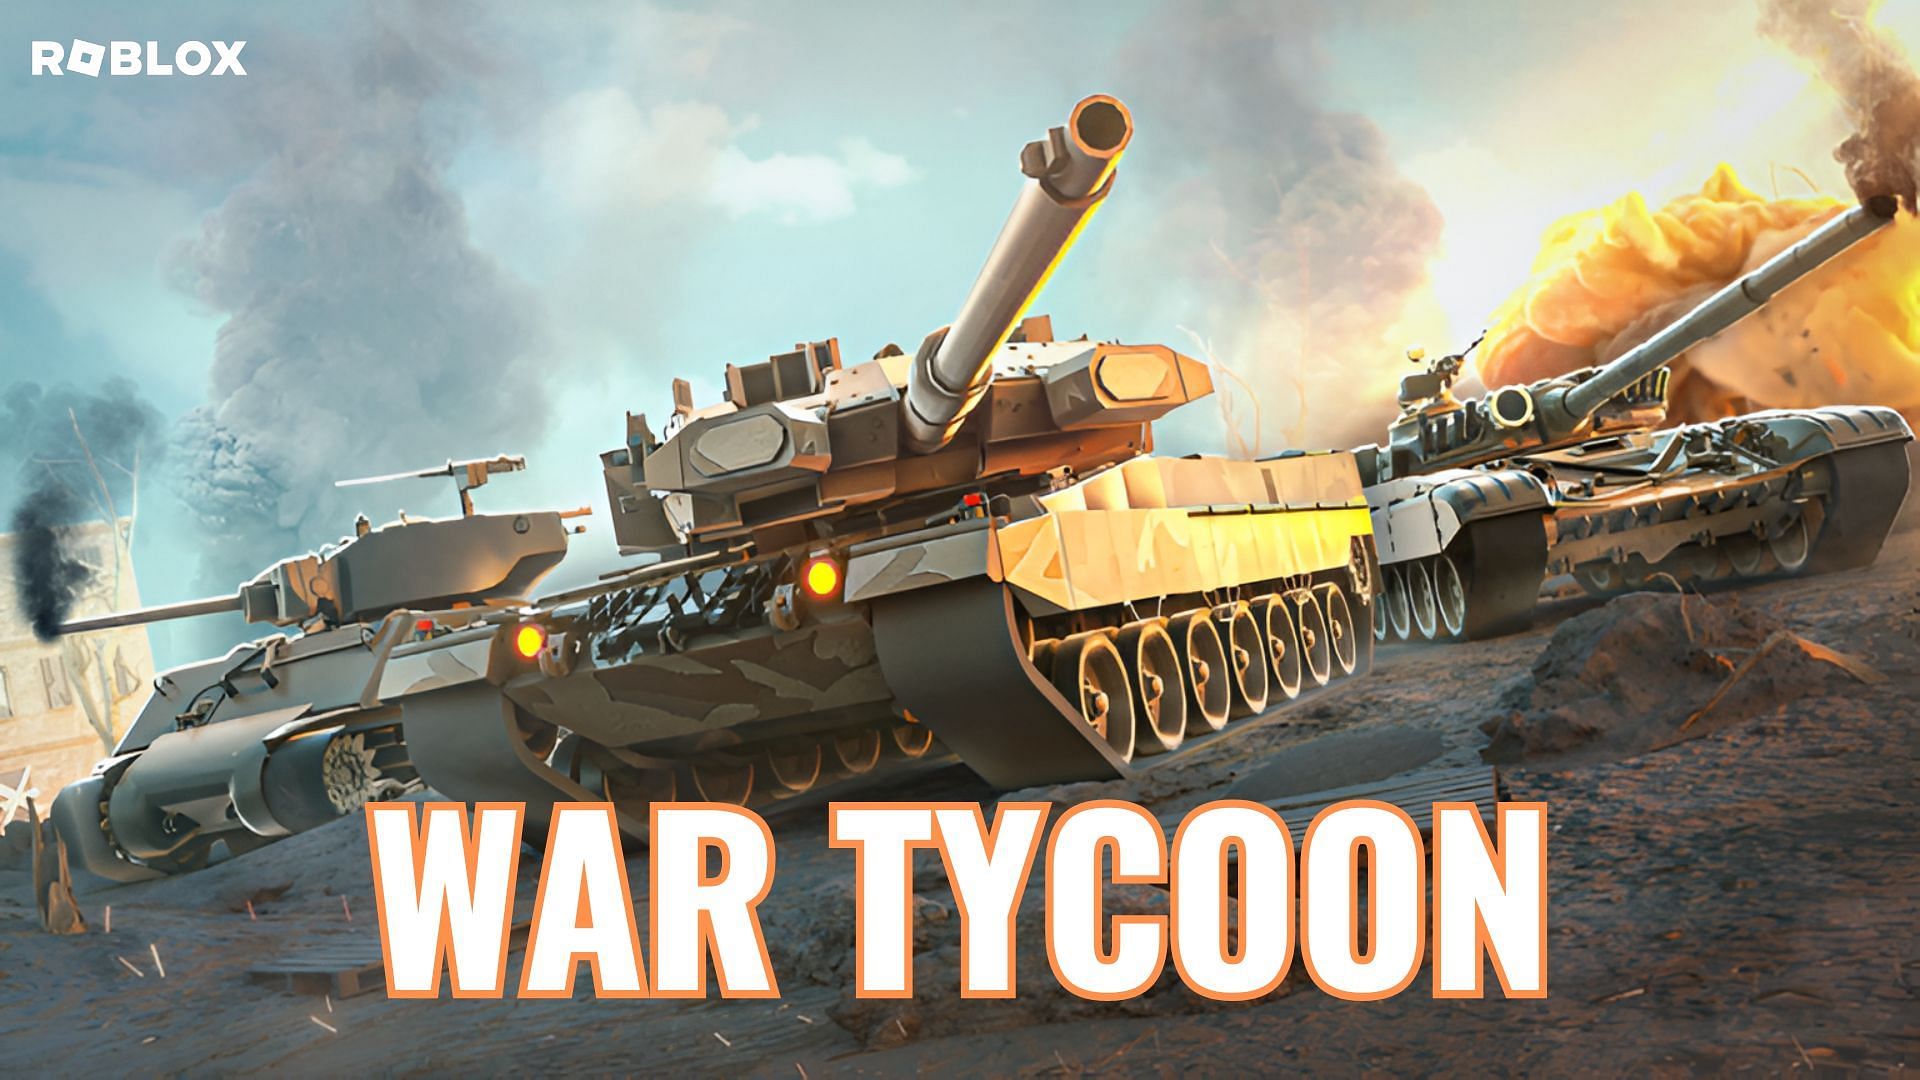 Everything important about War Tycoon (Image via Roblox and Sportskeeda)